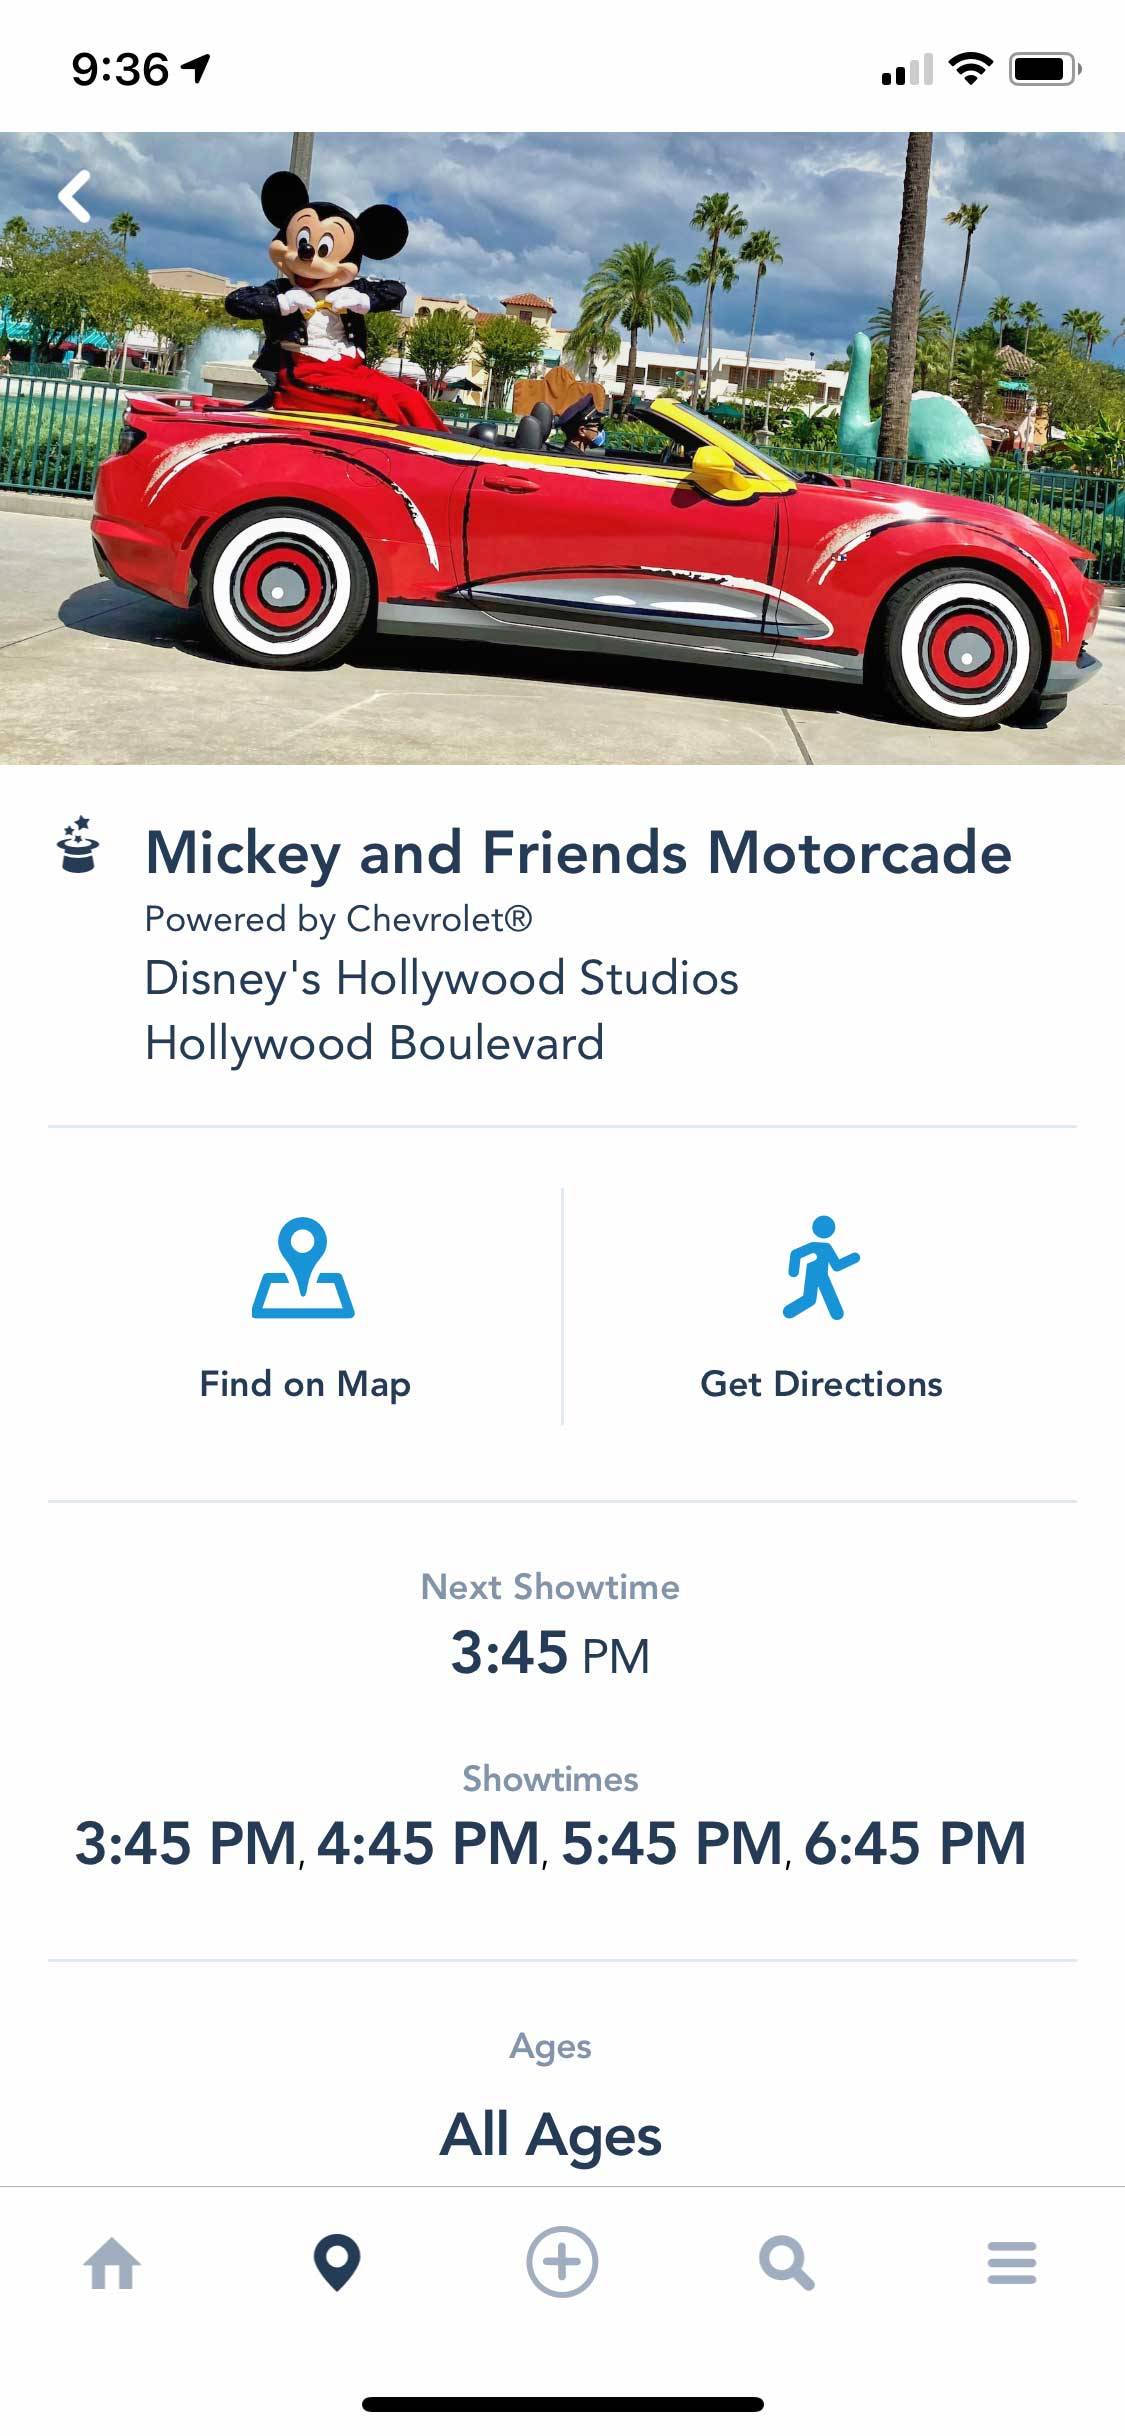 Mickey and Friends motorcade showtimes